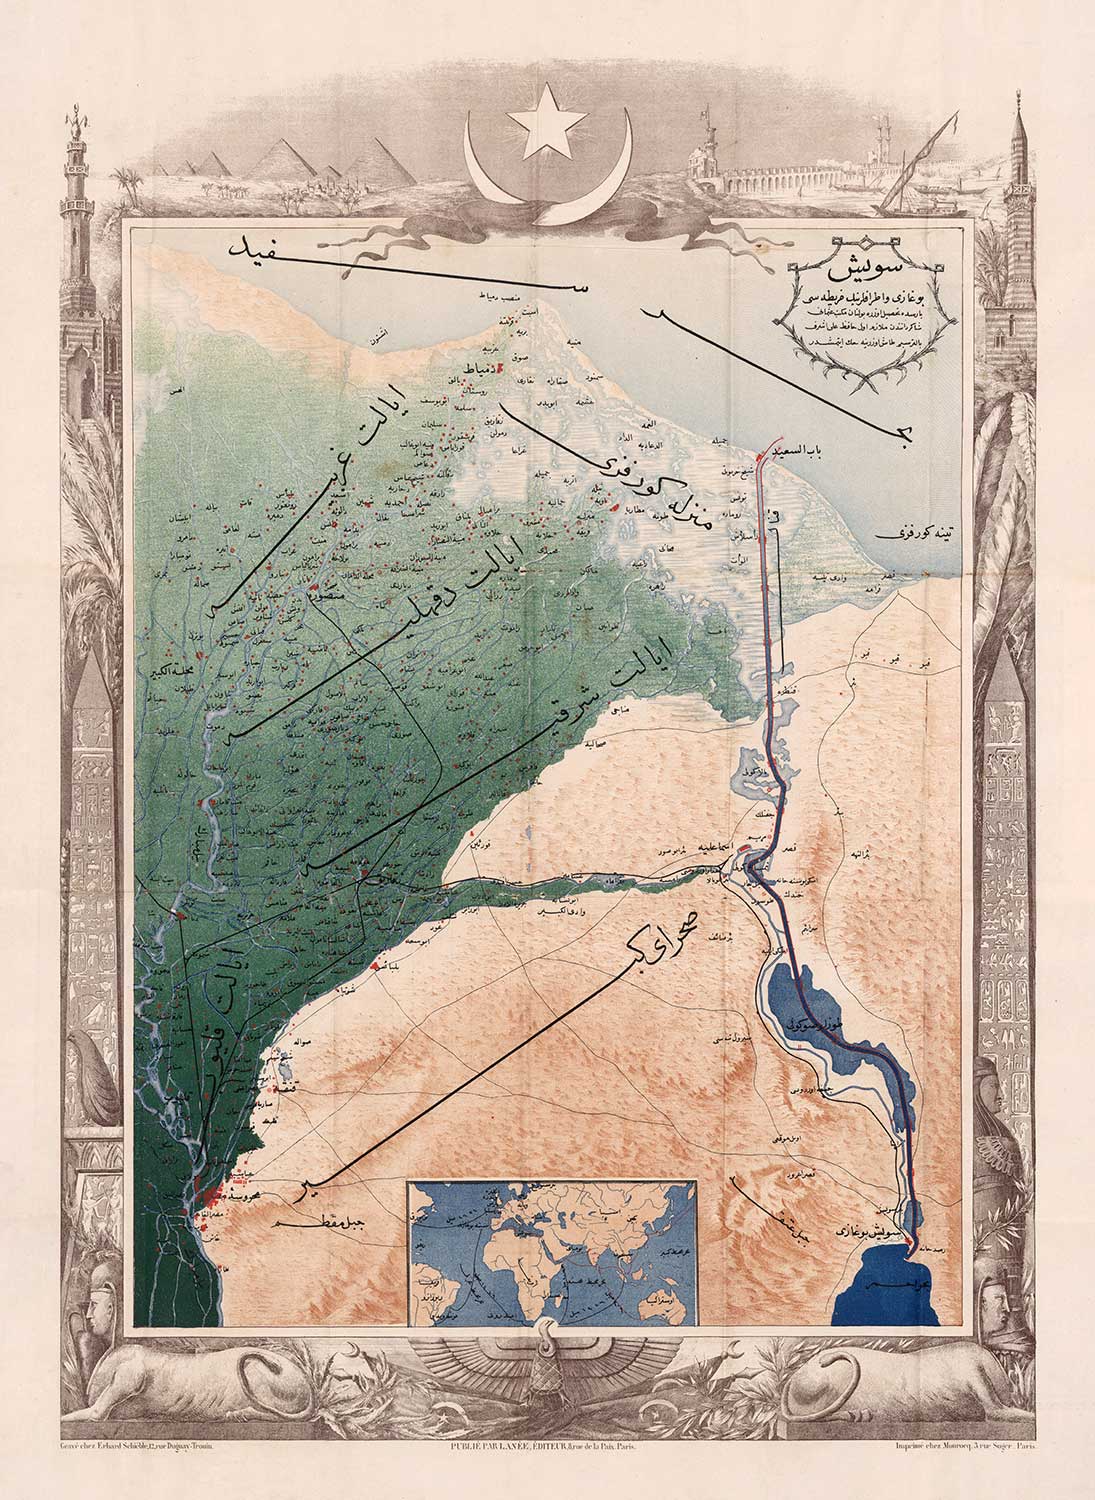 Old Arabic Map of Suez Canal by Erhard Schieble in 1869 - River Nile, Cairo, Mediterranean Sea, Mansoura